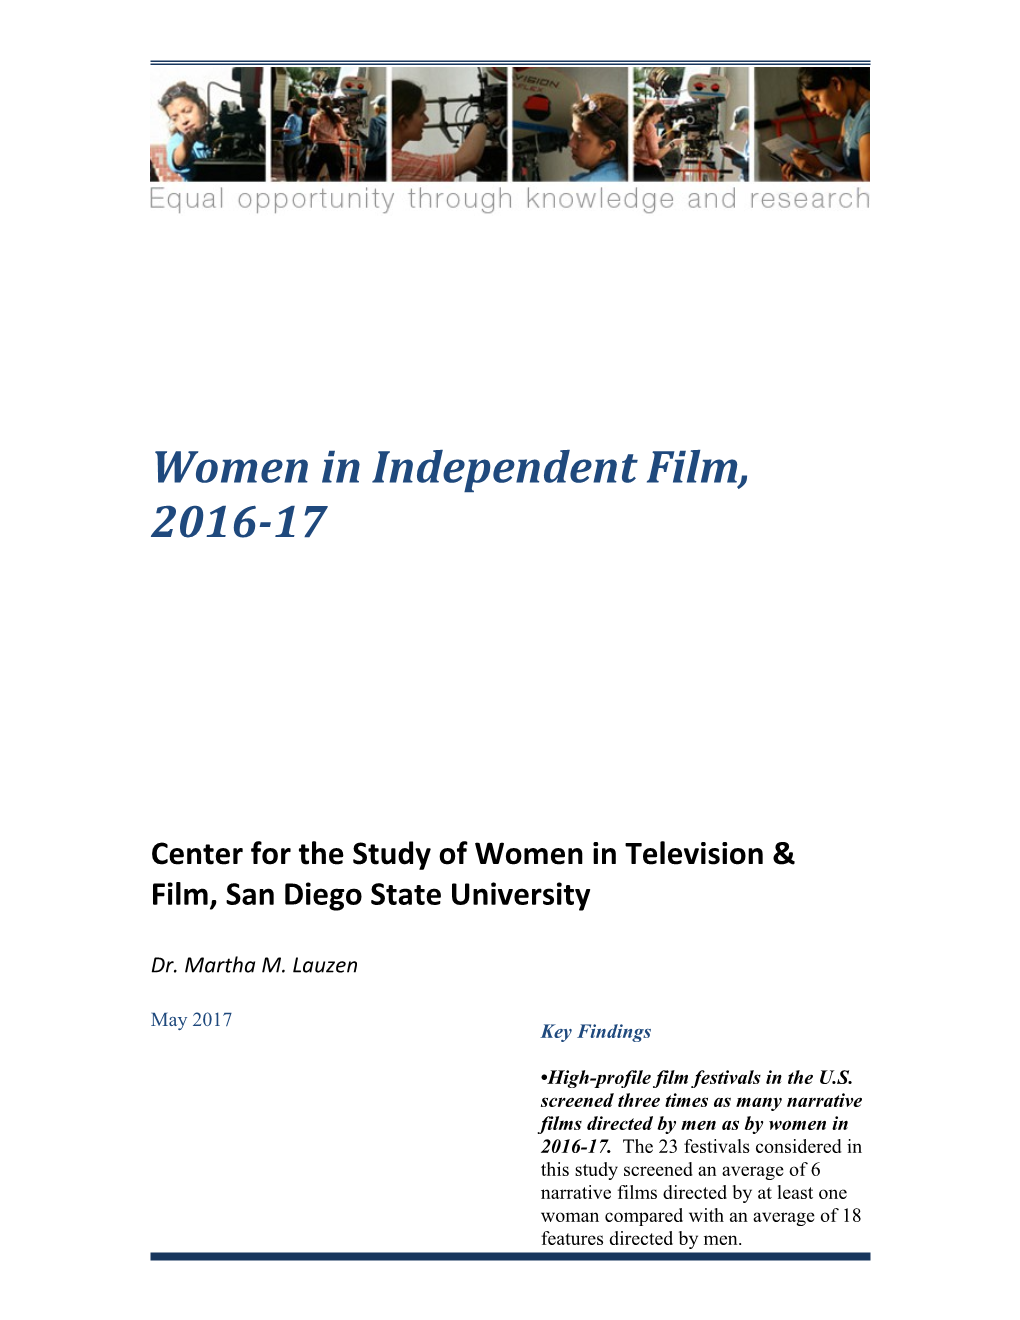 Center for the Study of Women in Television and Film